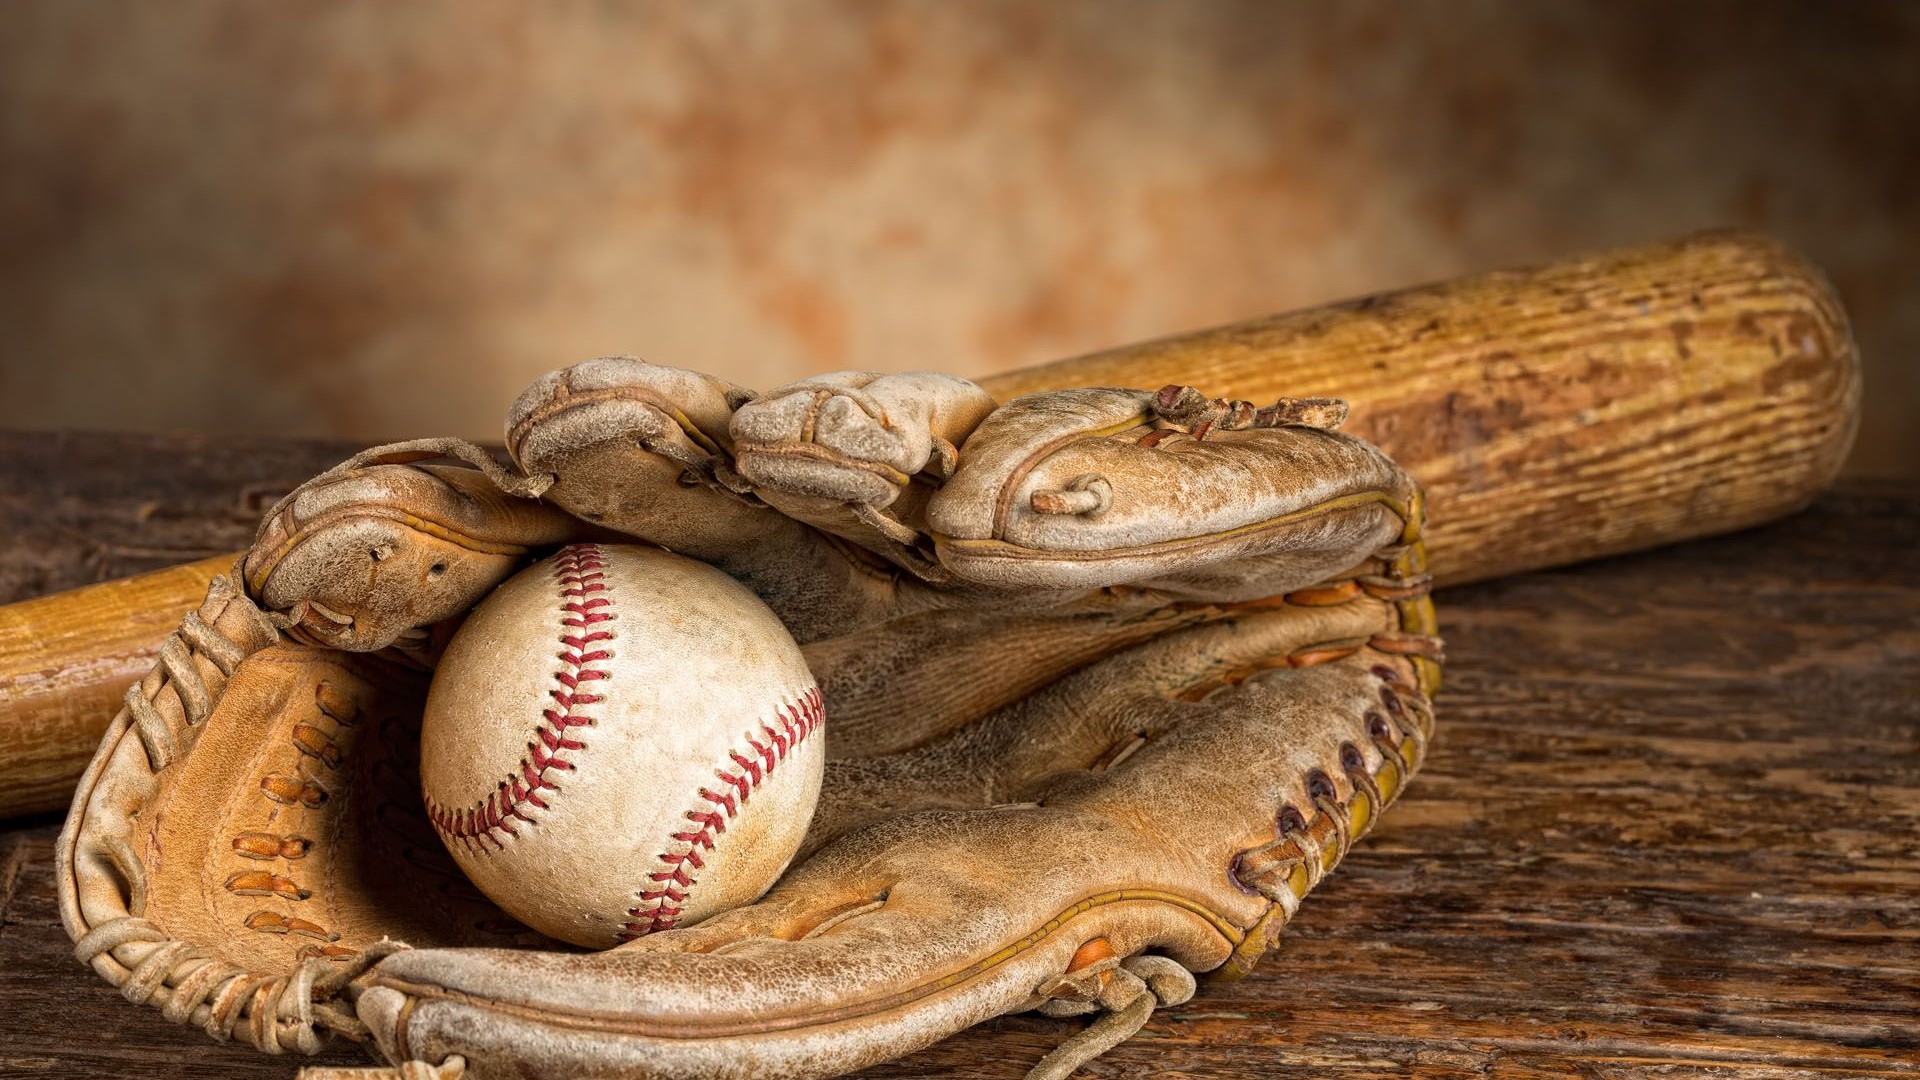 Cool Baseball Desktop Wallpaper with high-resolution 1920x1080 pixel. You can use this wallpaper for Mac Desktop Wallpaper, Laptop Screensavers, Android Wallpapers, Tablet or iPhone Home Screen and another mobile phone device